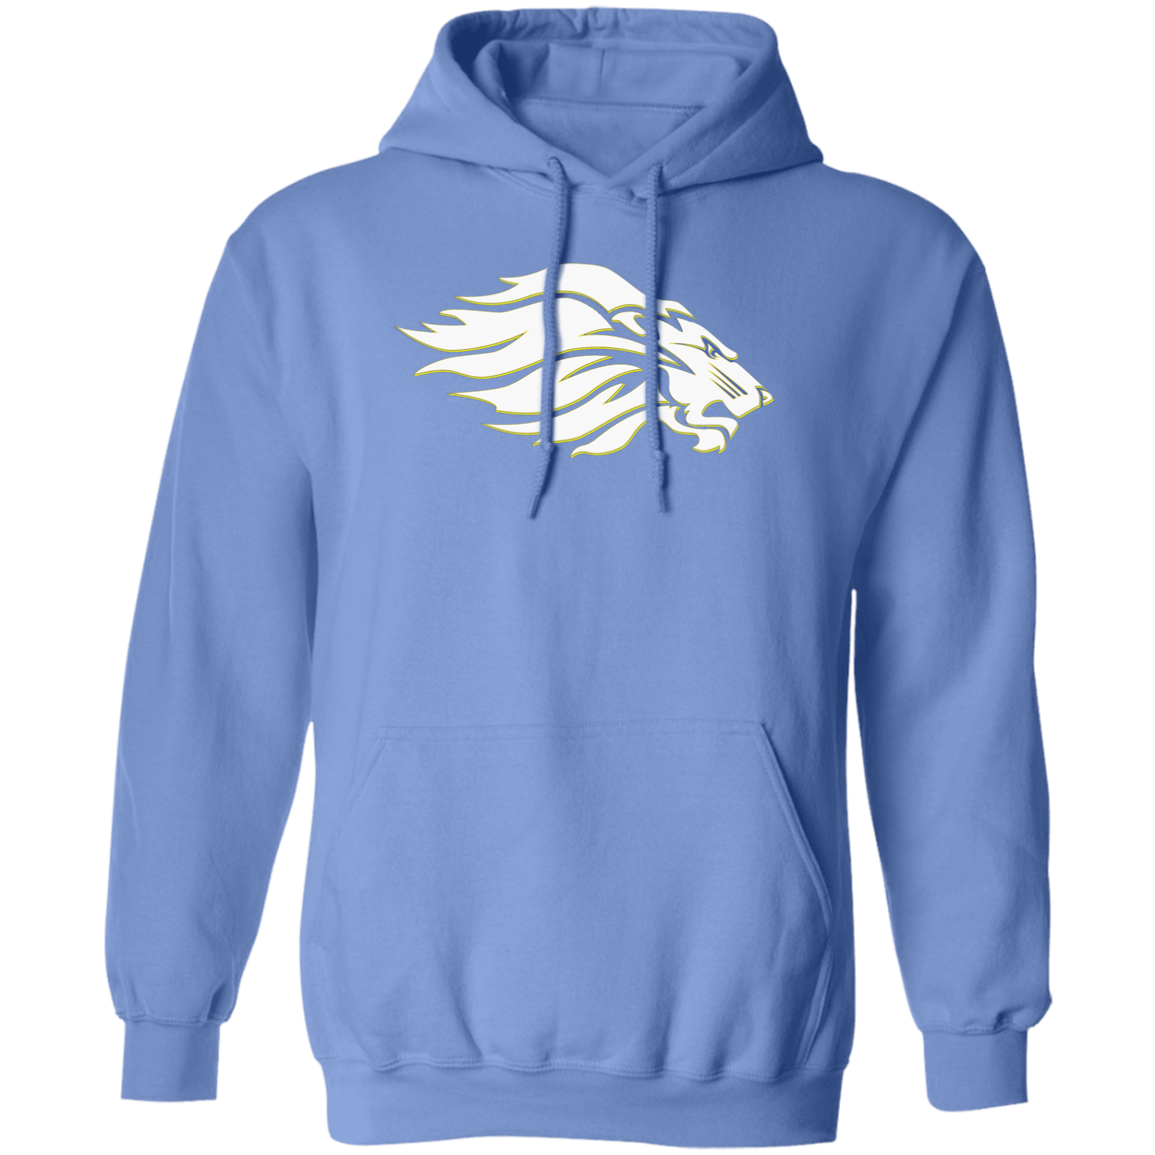 CCCS Lions Adult Size Pullover Hoodie